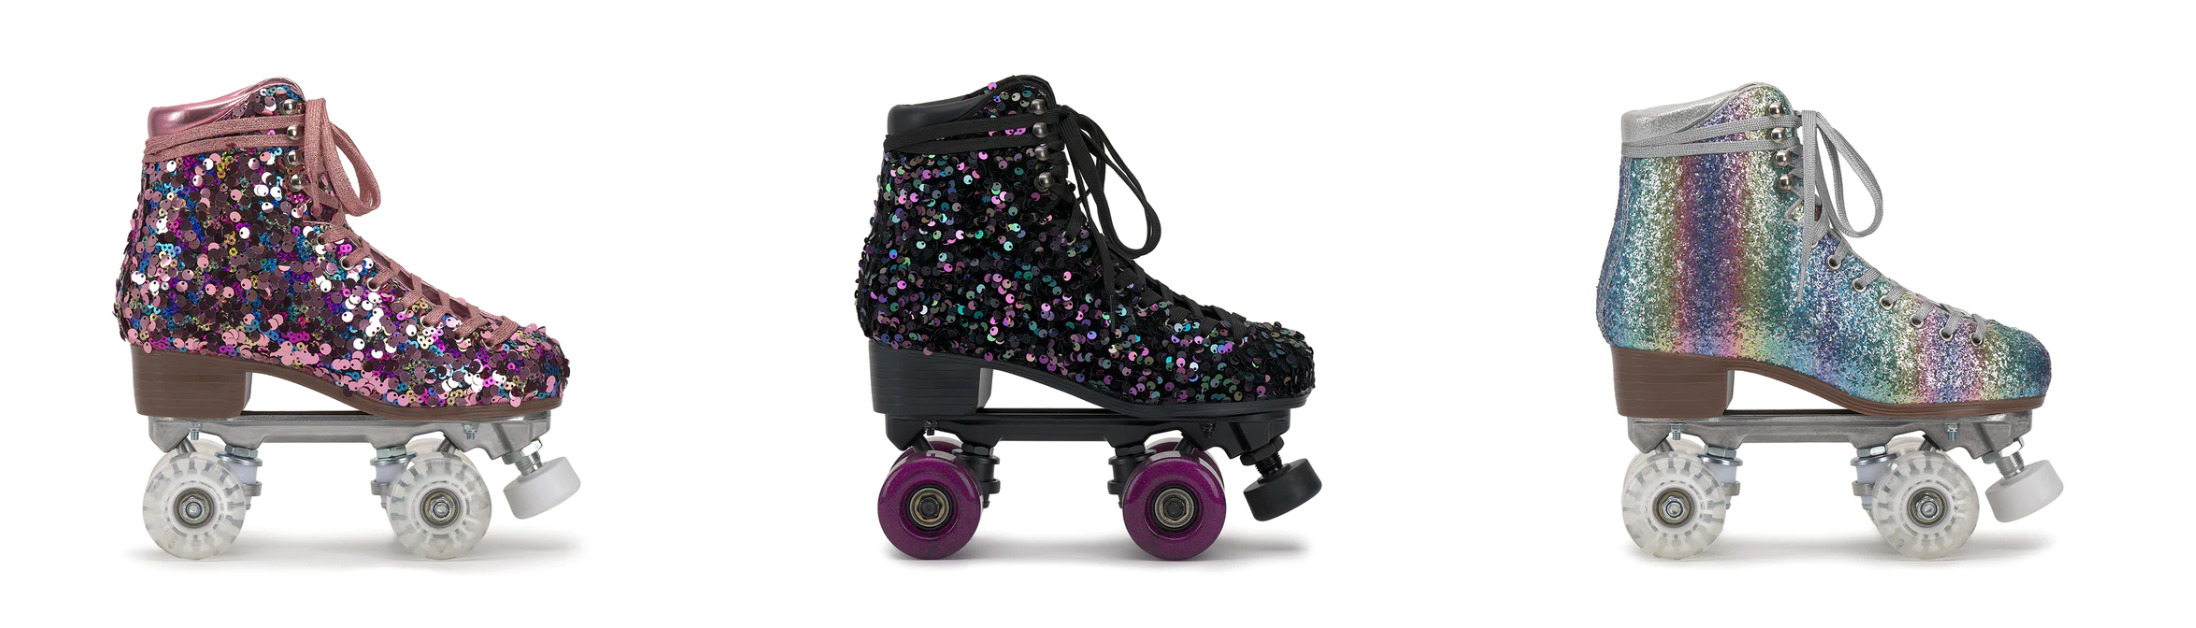 pink, black and silver rainbow sequined roller skates